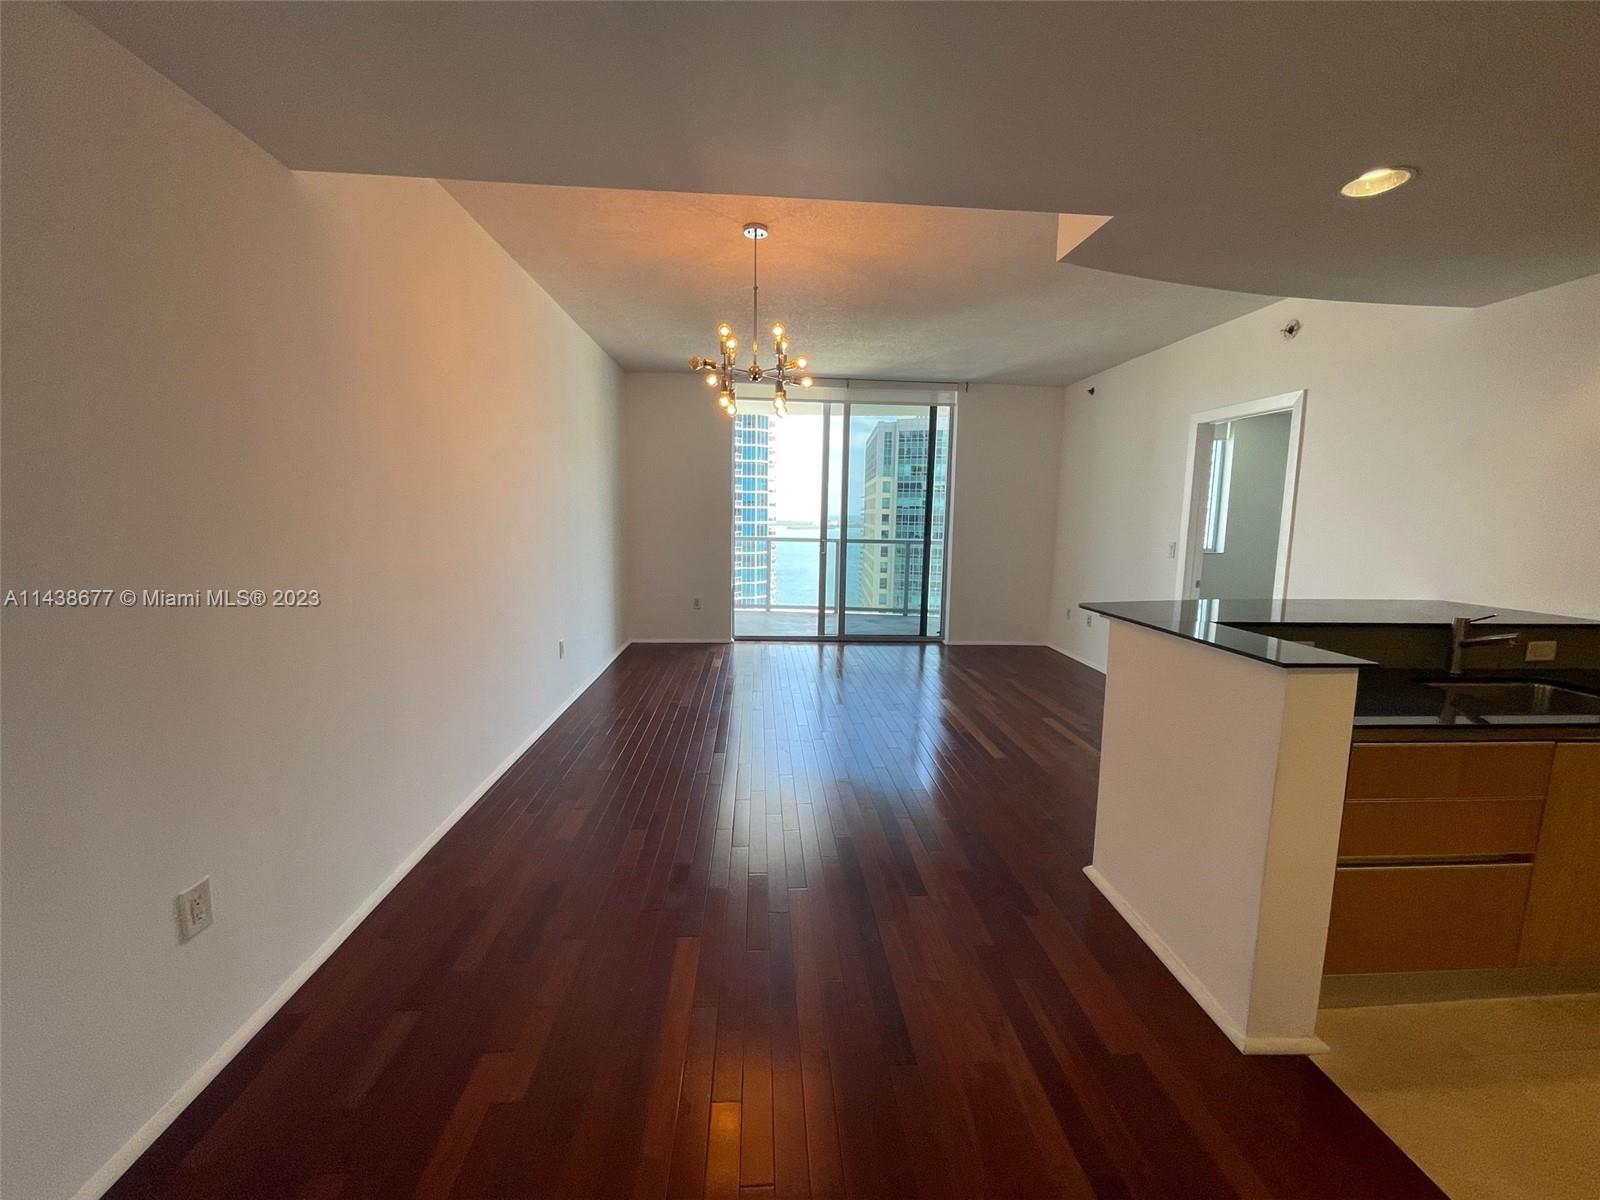 AMAZING, LARGE (963 SF) 1 BED / 1.5 BATHS UNIT @ 1060 BRICKELL!! BEAUTIFUL PANORAMIC VIEWS FROM BIG BALCONY FACING EAST. BEST LOCATION IN THE HEART OF BRICKELL AVE, WALK EVERYWHERE!! ENJOY MANY GREAT AMENITIES SUCH AS THE POOL, FITNESS CENTER, AND MORE!!! 1 ASSIGNED PARKING SPACE INCLUDED!!!